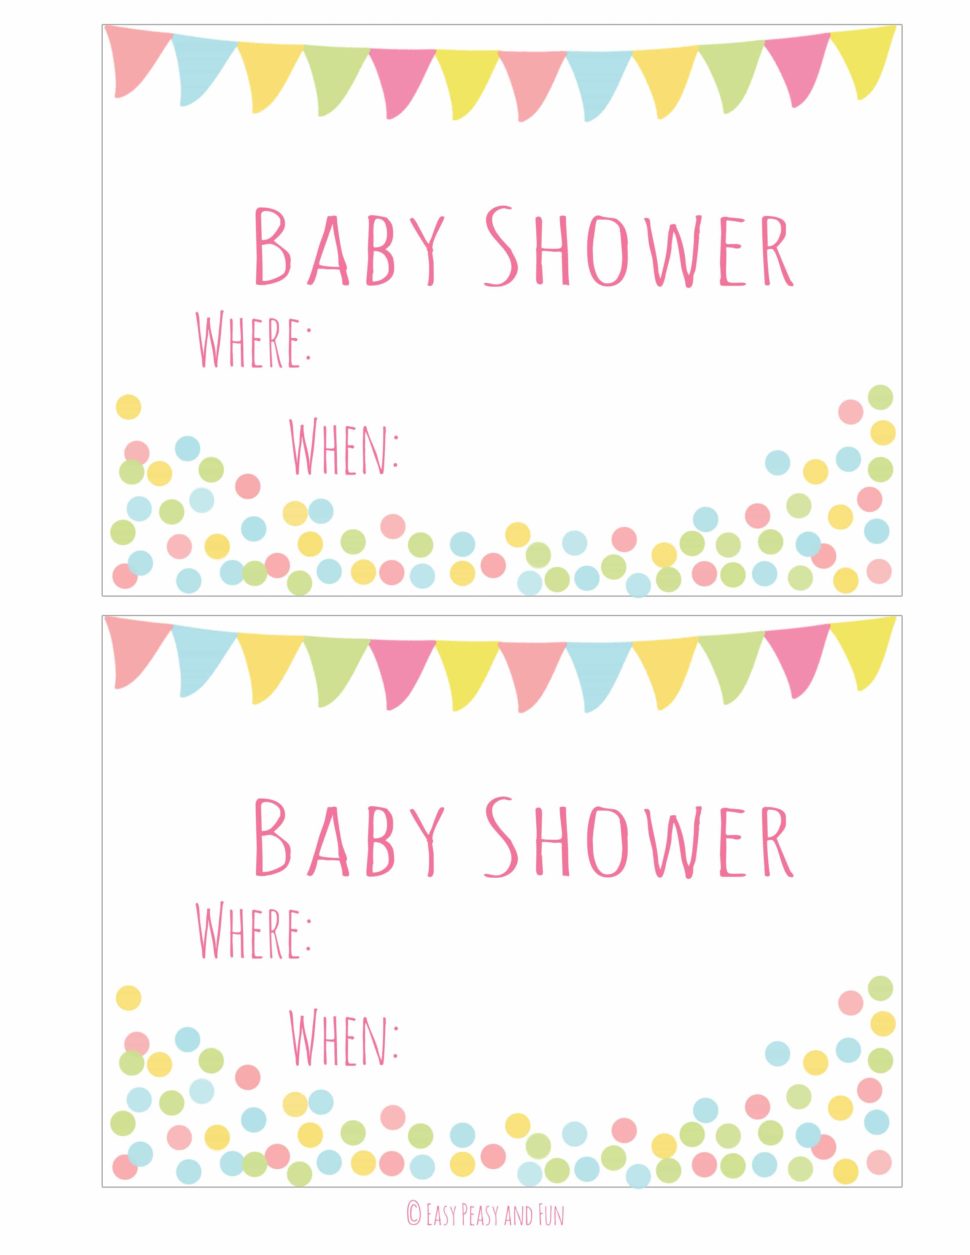 Medium Size of Baby Shower:nursery Themes For Girls Baby Girl Party Plates Girl Baby Shower Decorations Baby Shower Decorations For Girls Cheap Invitations Baby Shower Homemade Baby Shower Decorations Baby Shower Centerpiece Ideas For Boys Homemade Baby Shower Centerpieces